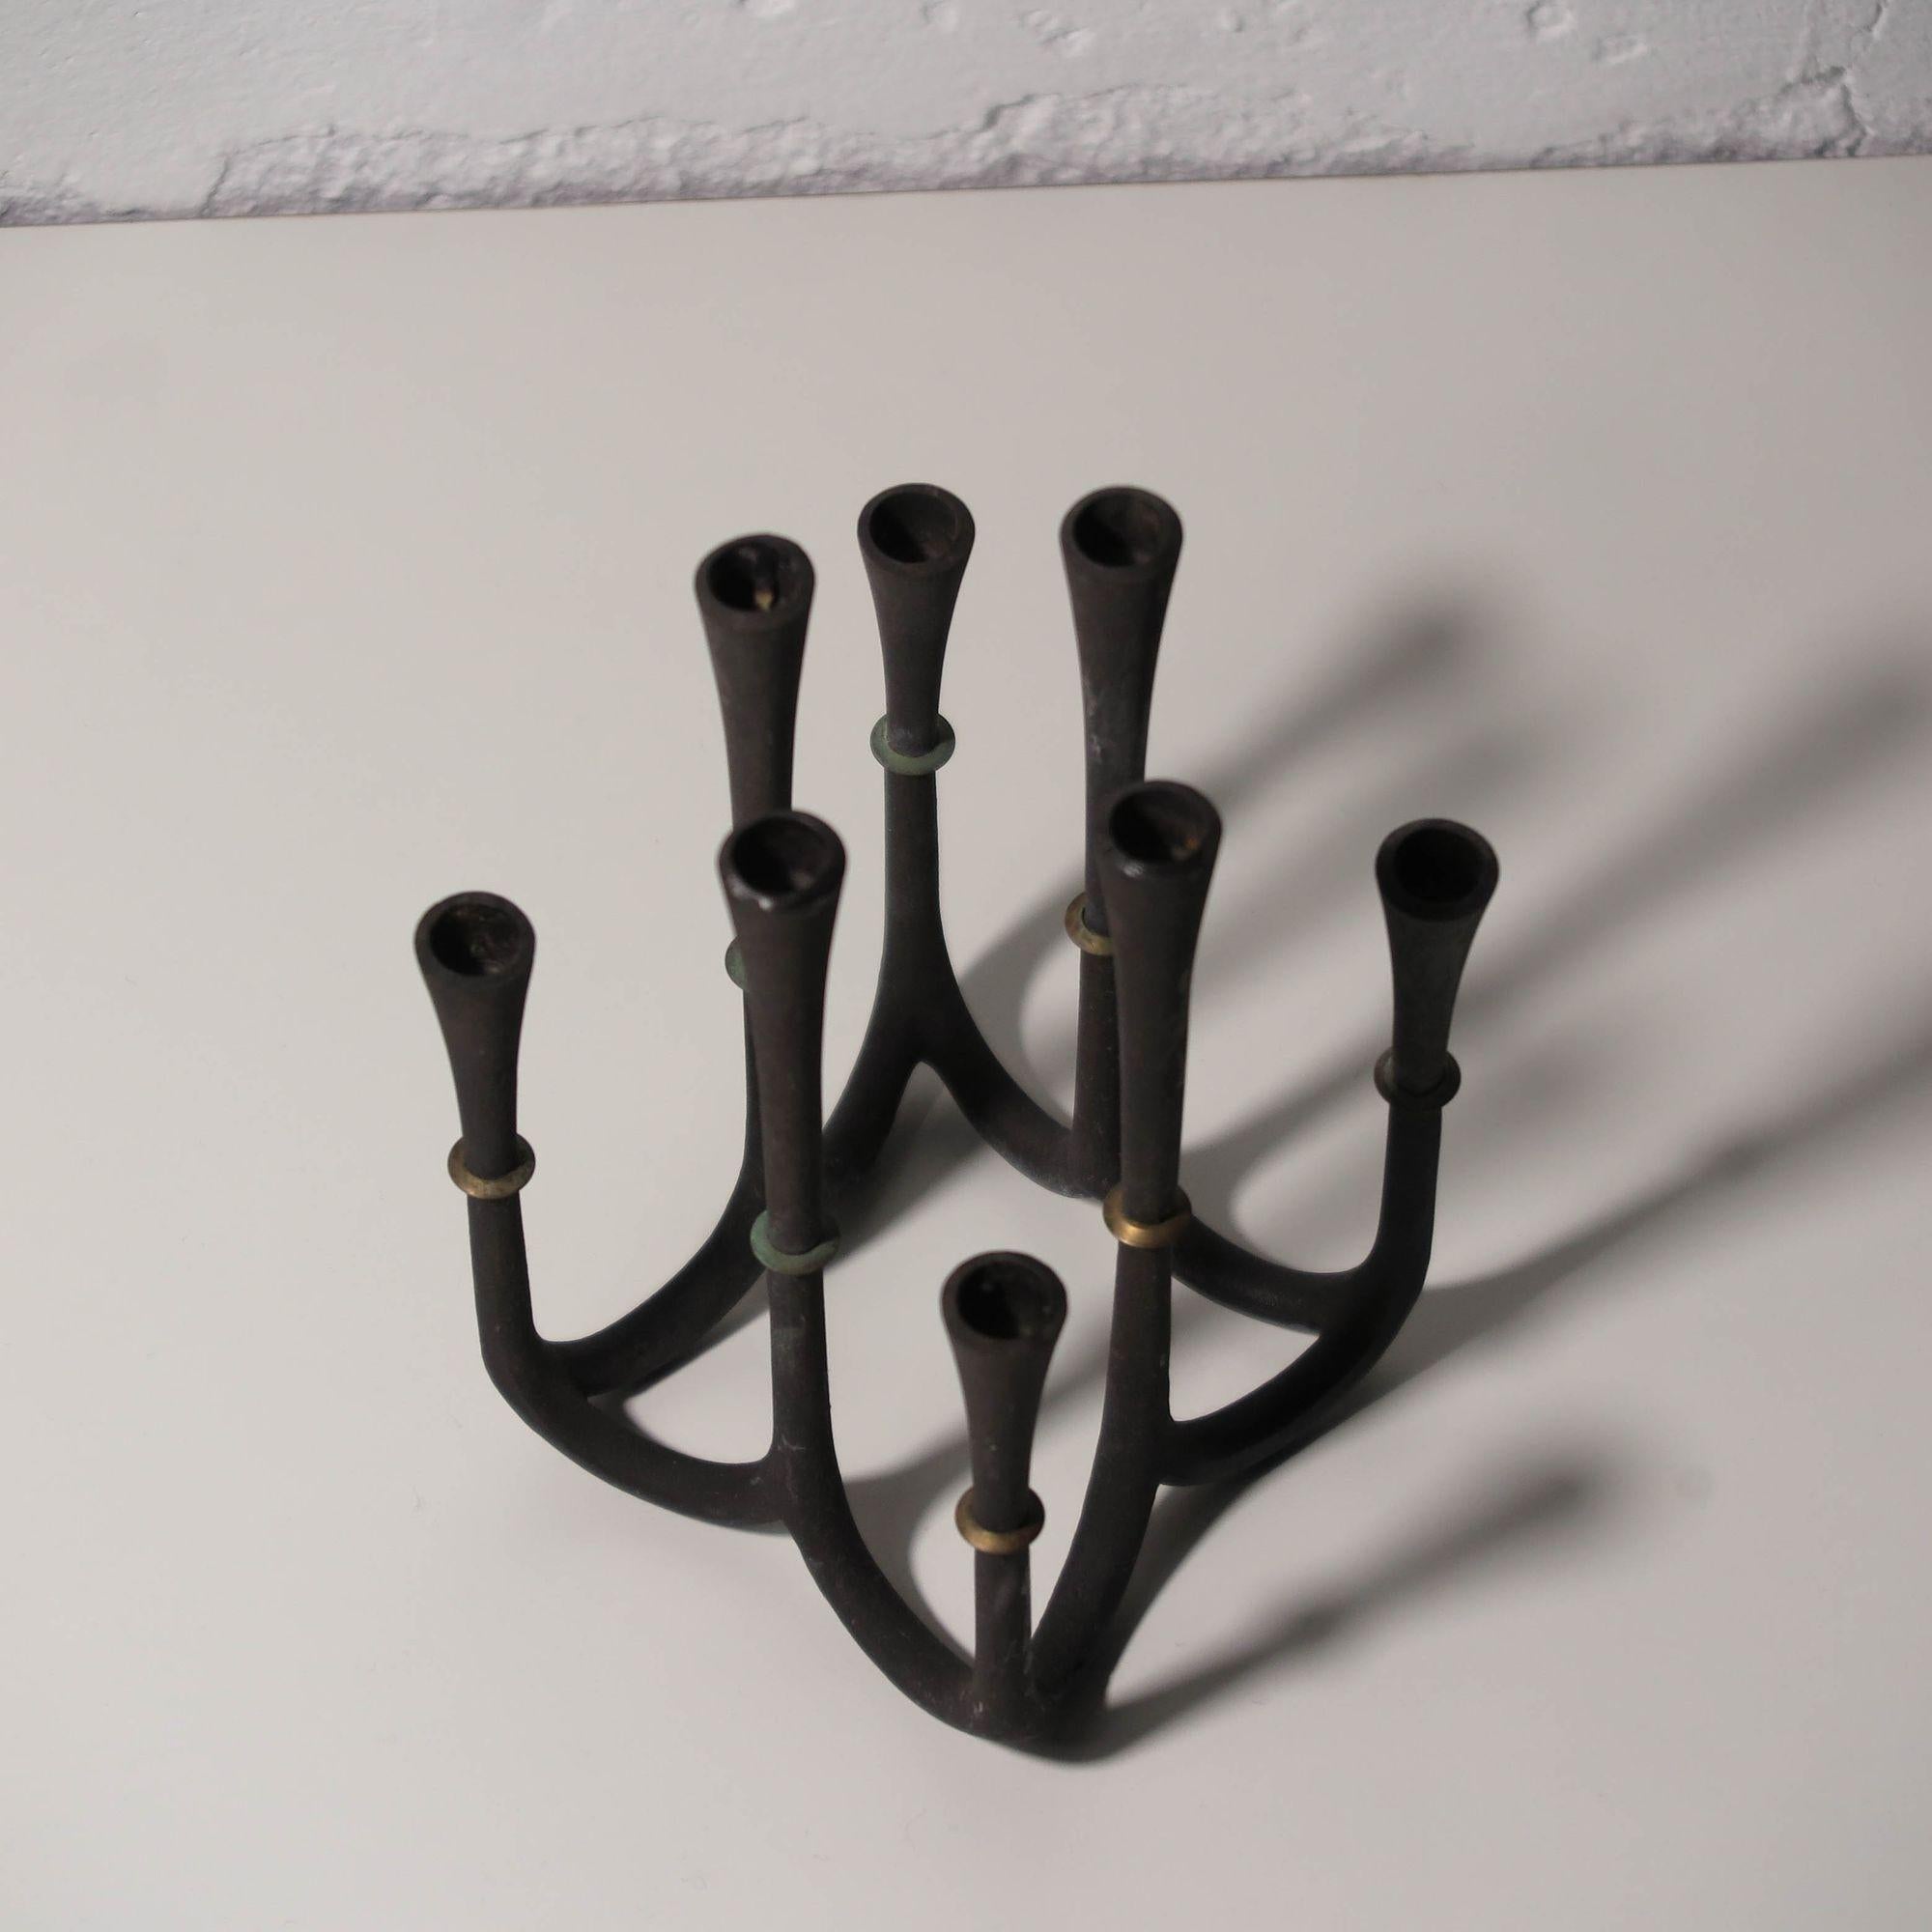 Jens Quistgaard Candelabra, Cast Iron In Excellent Condition For Sale In Oakland, CA